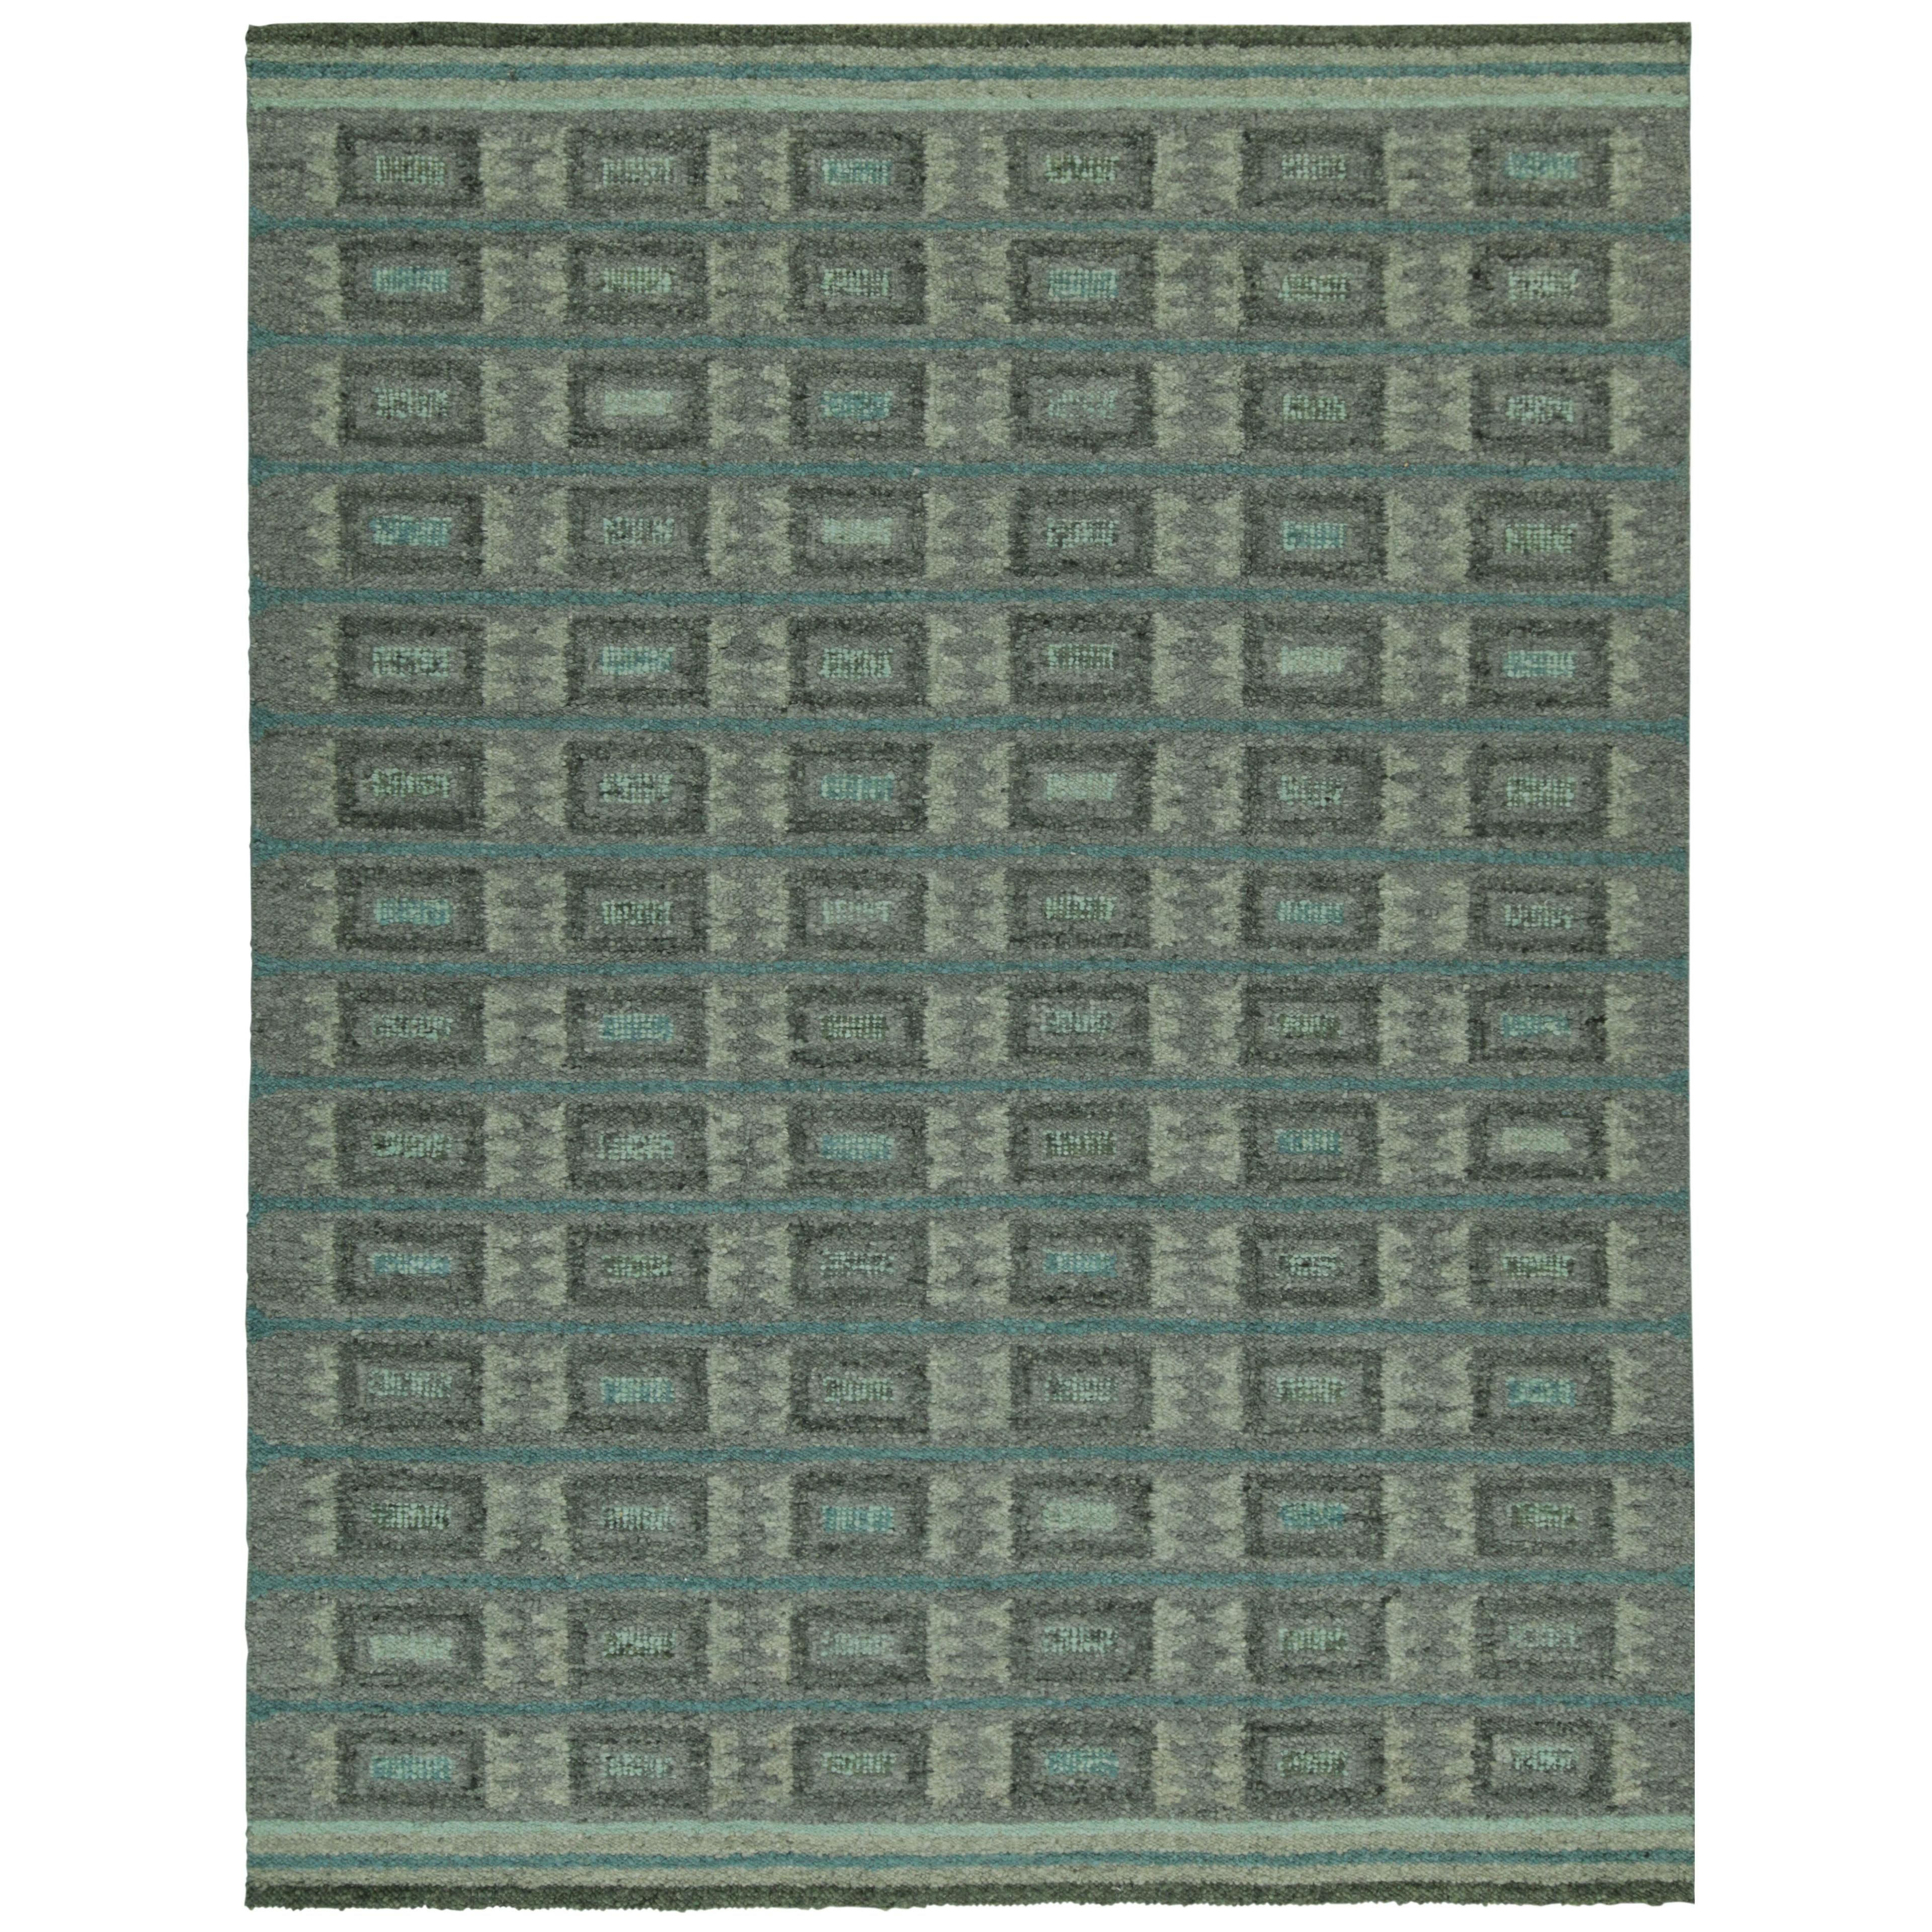 Rug & Kilim’s Scandinavian Style Kilim With Gray And Blue Geometric Patterns